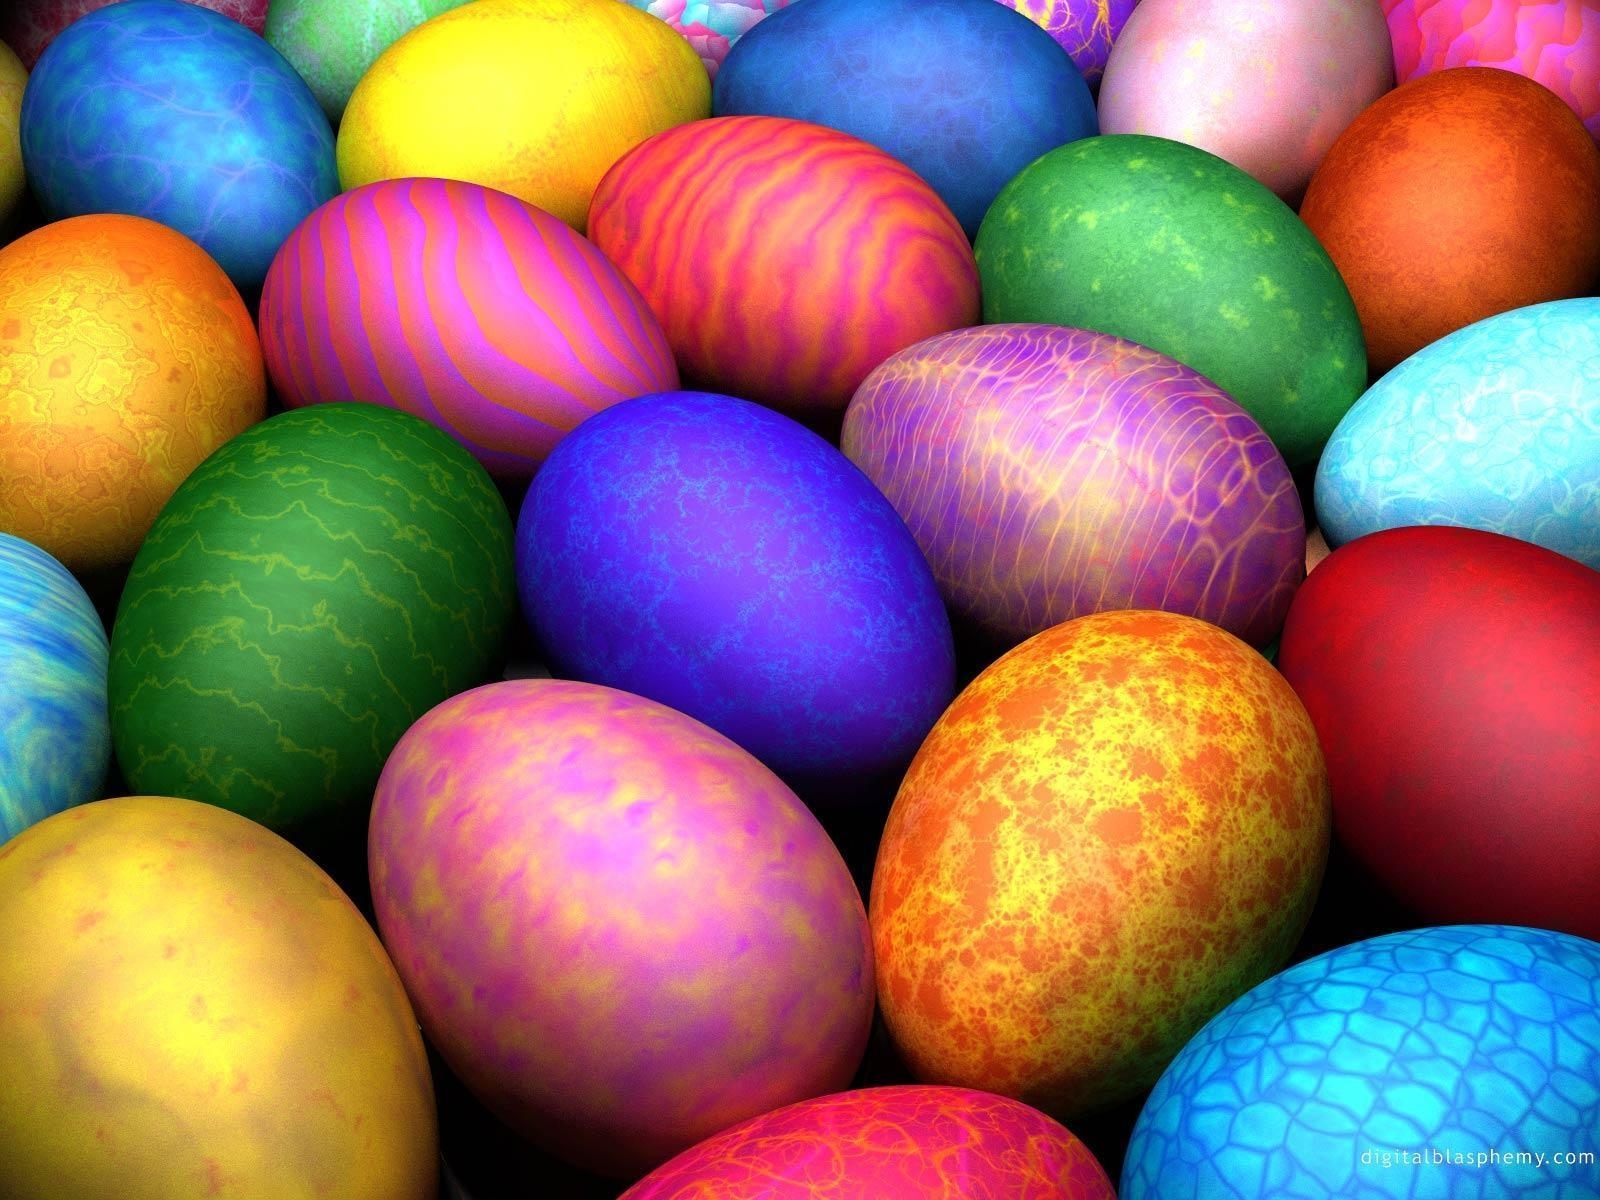 10 Top Free Easter Desktop Wallpapers FULL HD 1920×1080 For PC Background